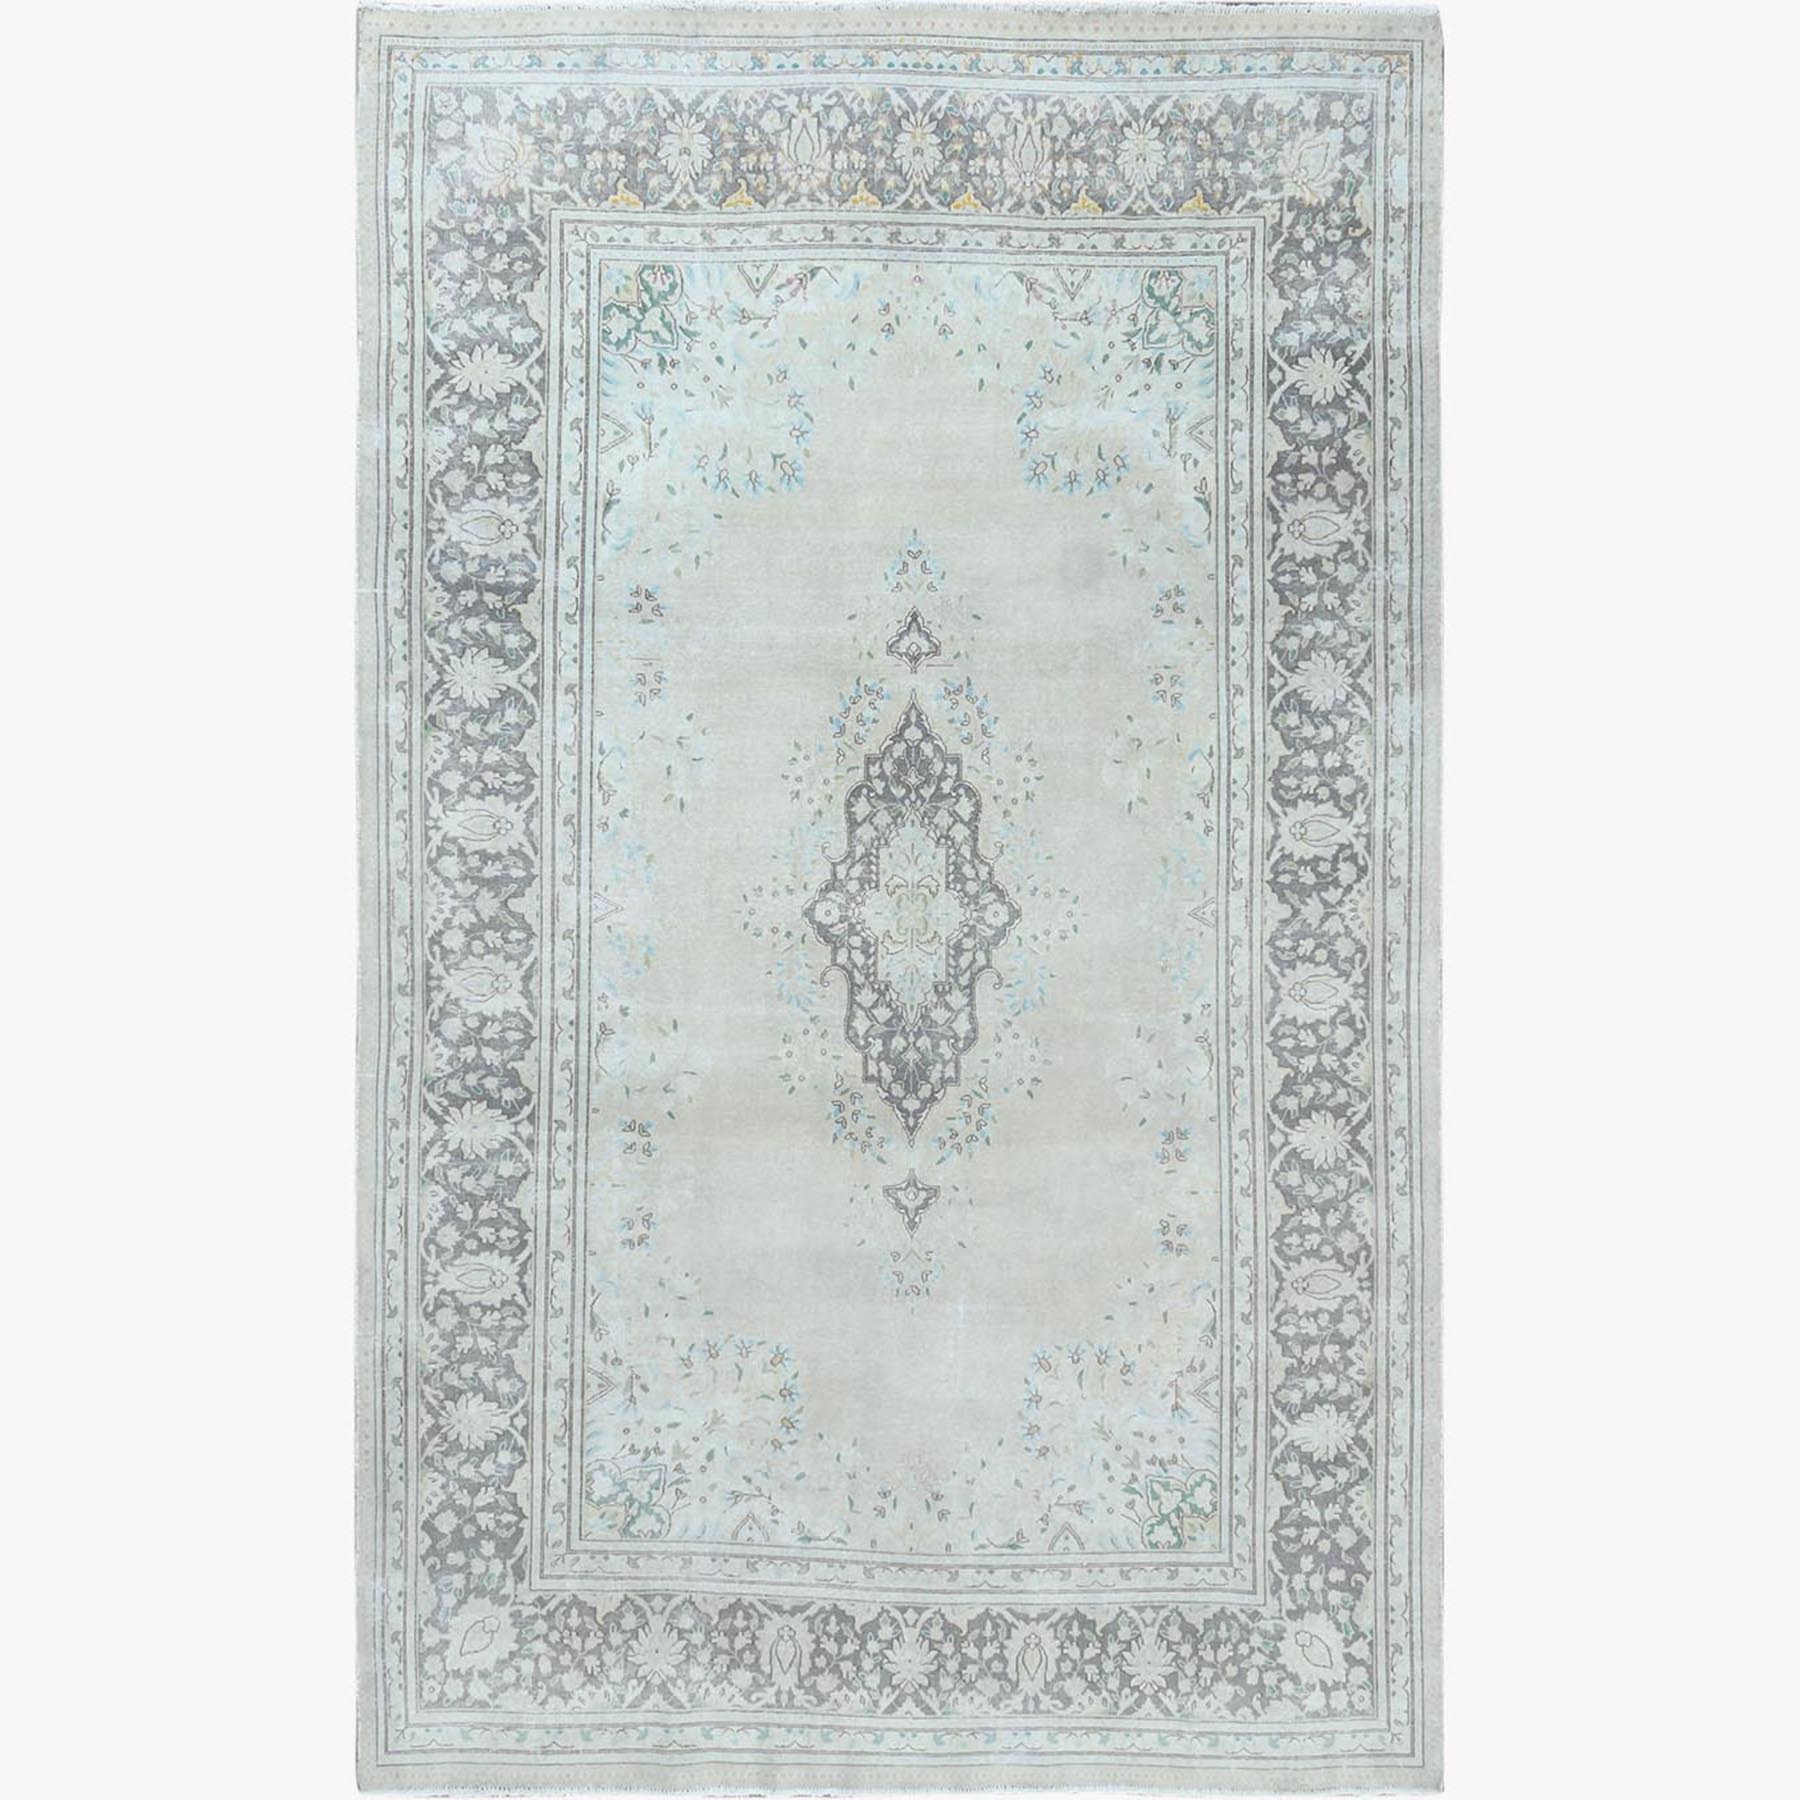 6'9"x10'10" Bohemian Hand Woven Washed Out Gray Organic Wool Worn Down Clean Persian Kerman Old Oriental Rug 